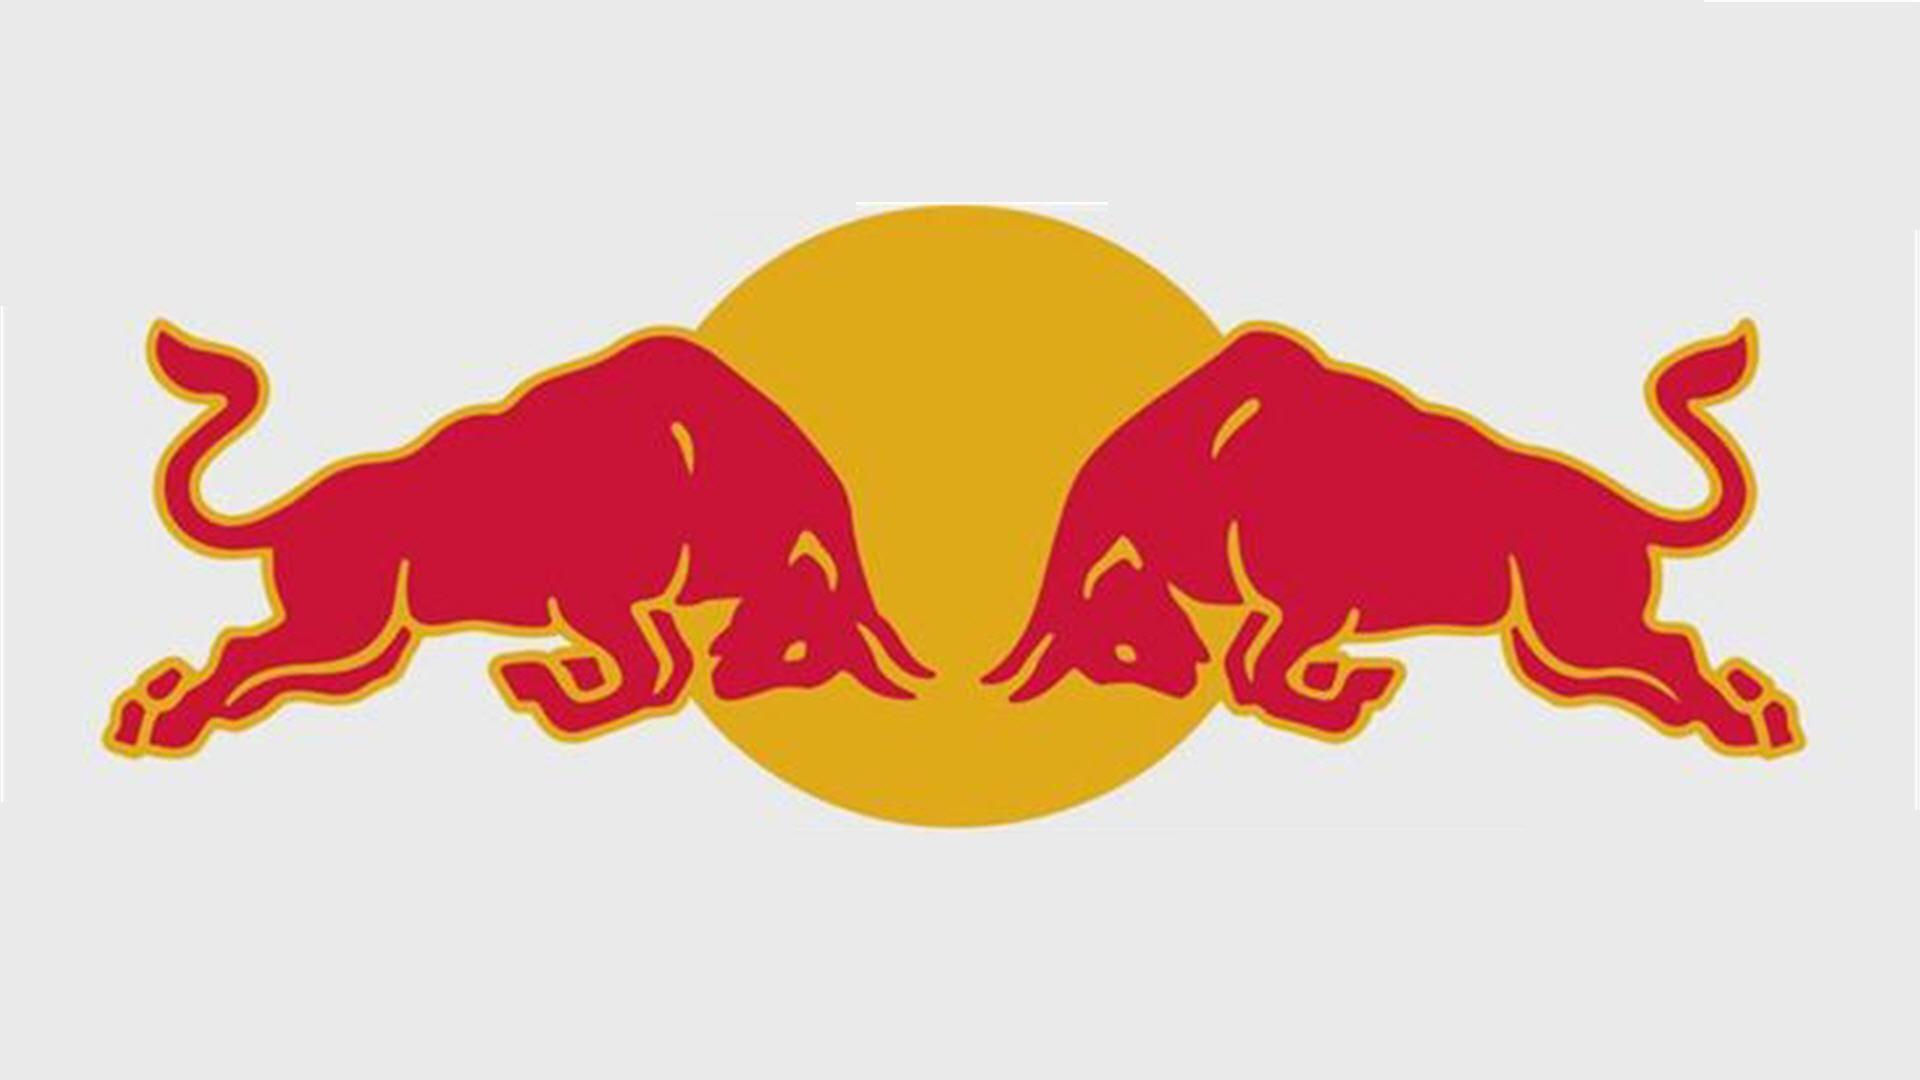 Red Bull Logo Drawing.com. Free for personal use Red